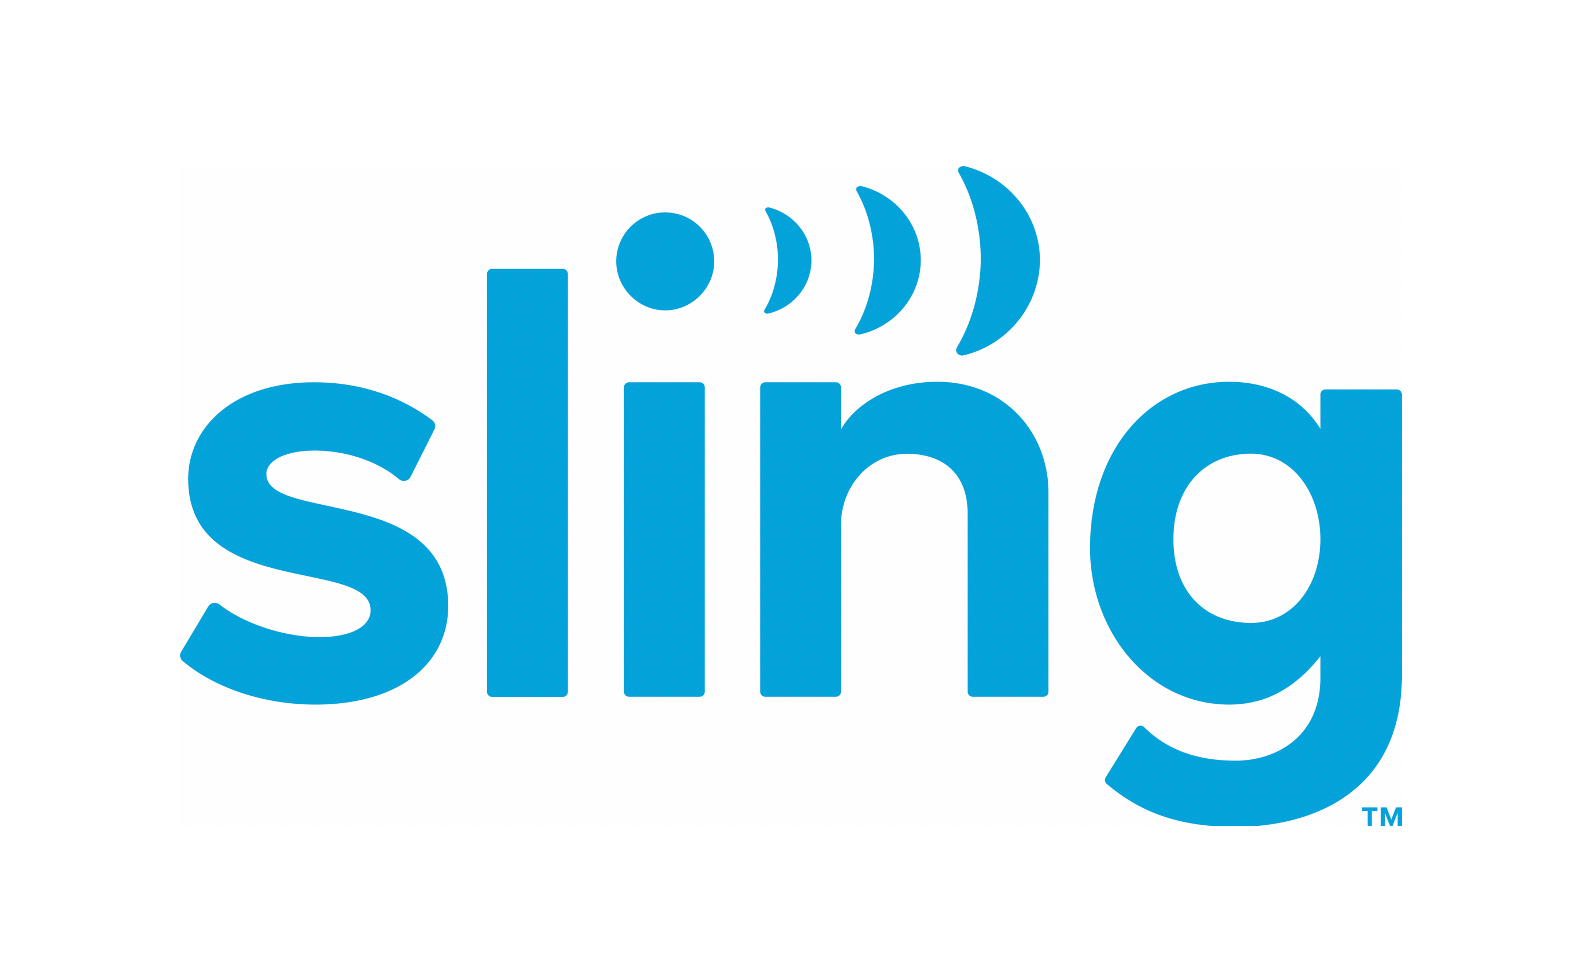 Deal Alert: Sling TV is Offering a Free HD Antenna & Just in Time for The Super  Bowl